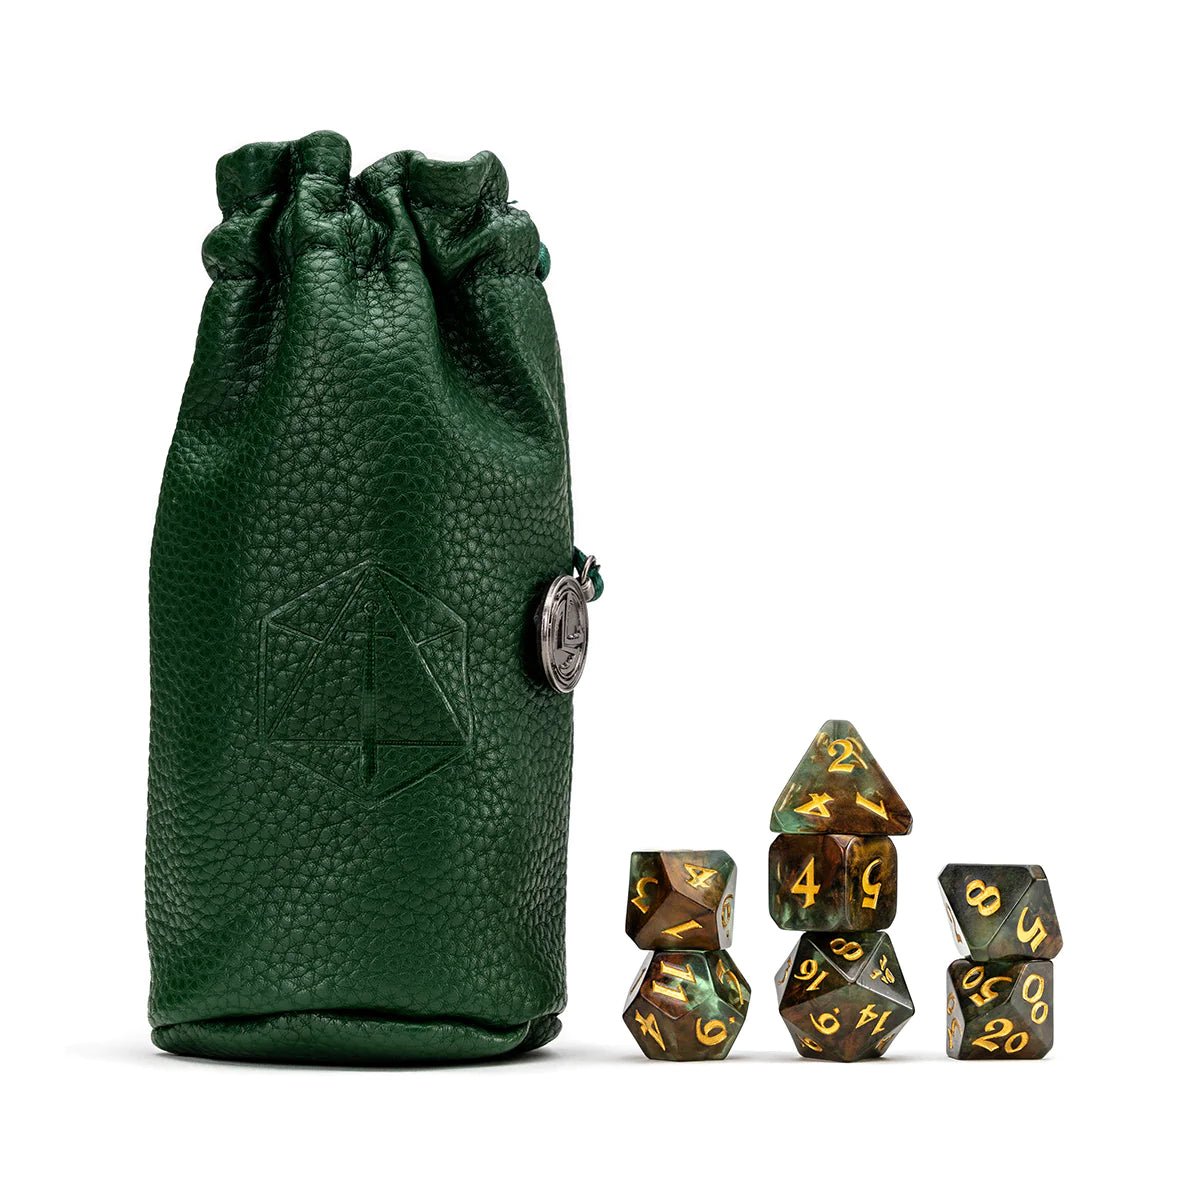 Vox Machina Dice Set: Keyleth (Green/Natural) - The Fourth Place